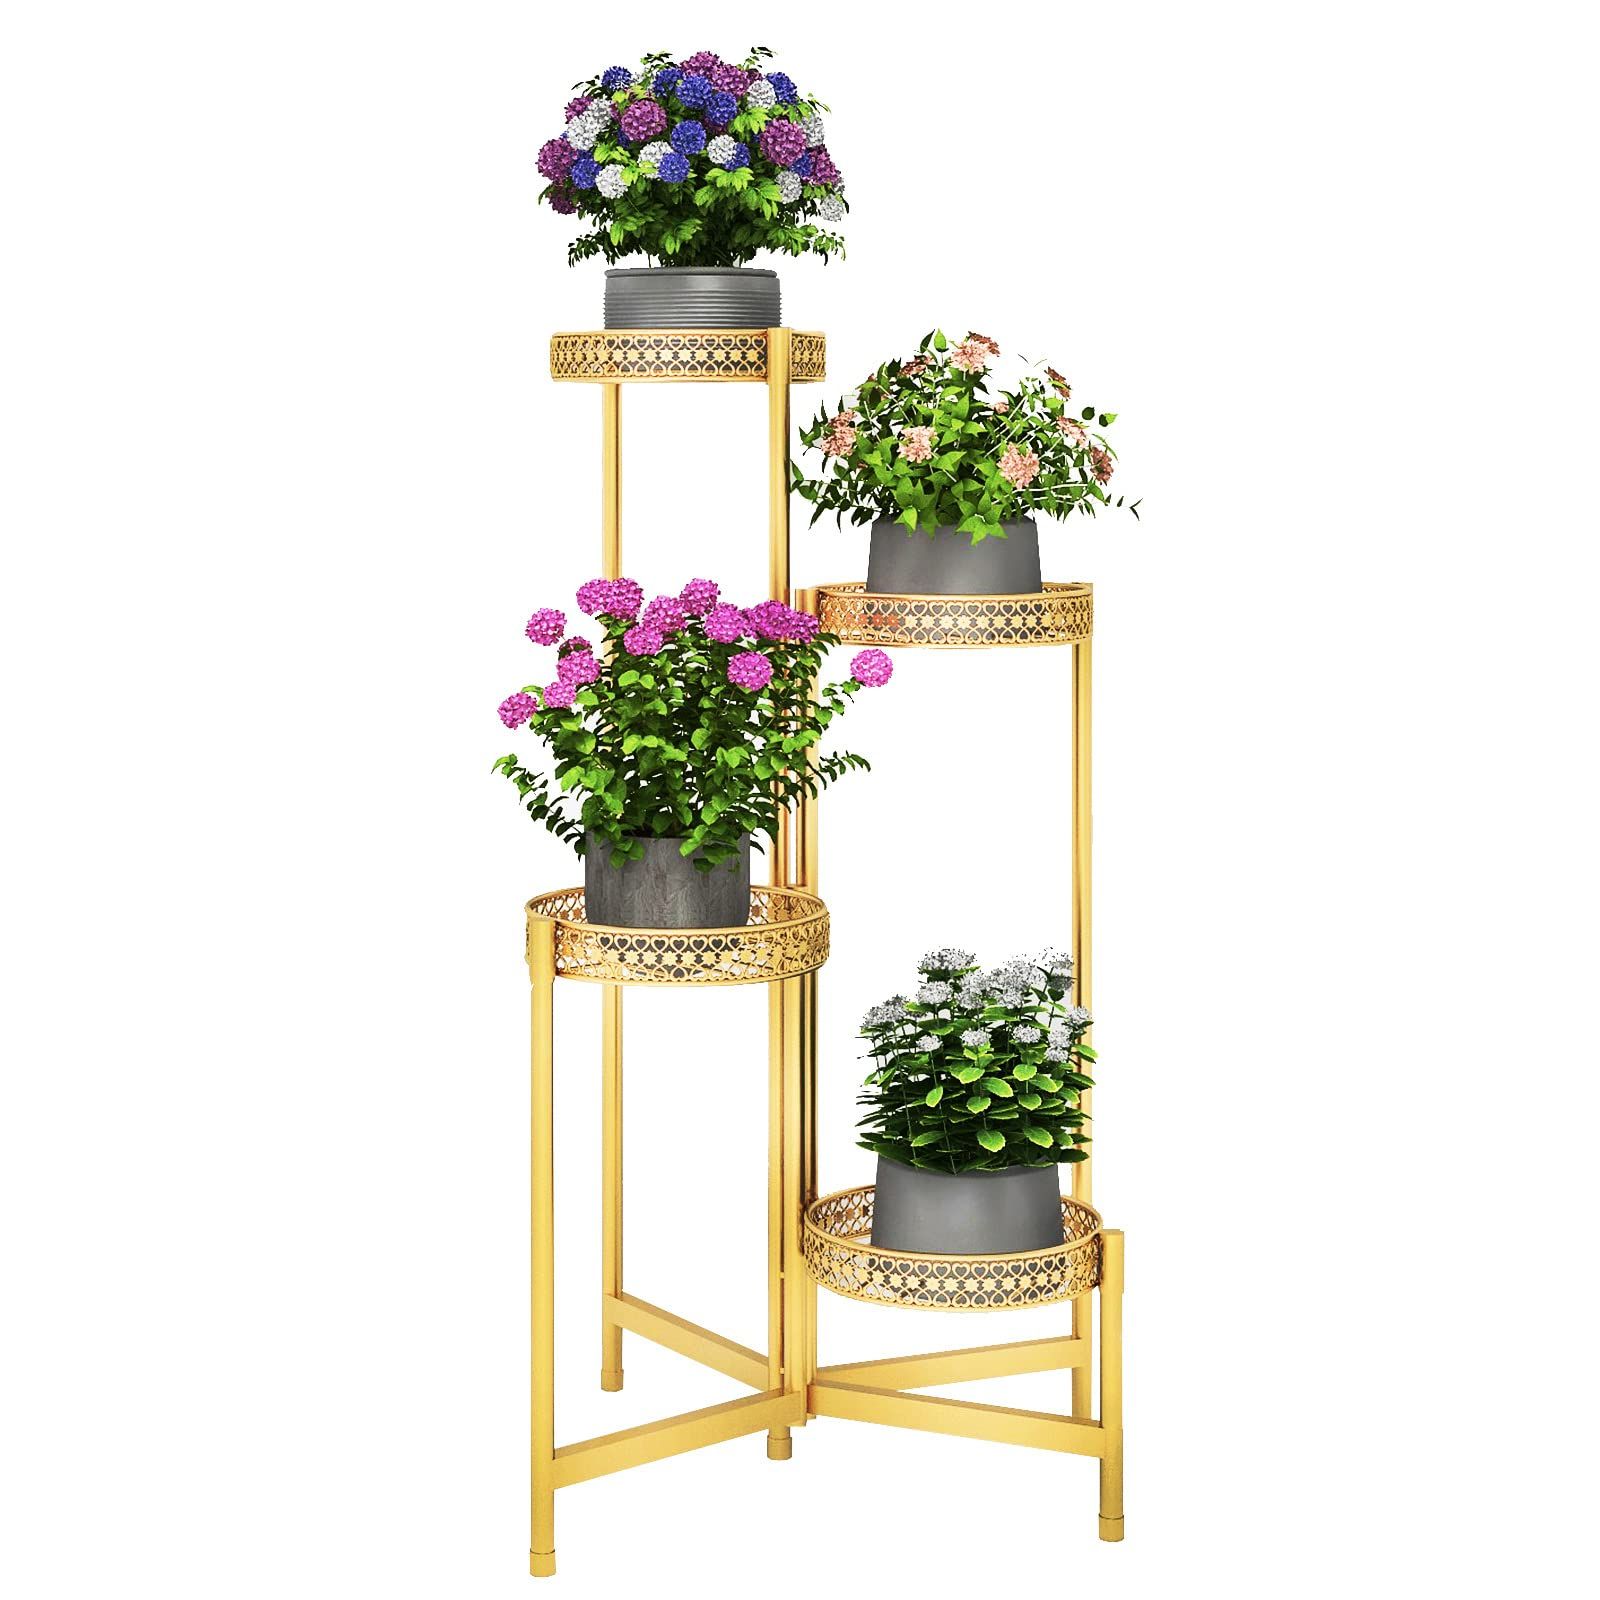 2017 31 Inch Plant Stands For Amazon: Ujoyant 4 Tier Plant Stand Indoor, 31 Inches Tall Carving Plant  Stand Outdoor, Gold Plant Stands For Indoor Plants Multiple Foldable Design  Is Waterproof And Rust Proof, Plant Shelf For Balcony, Home, (View 10 of 10)